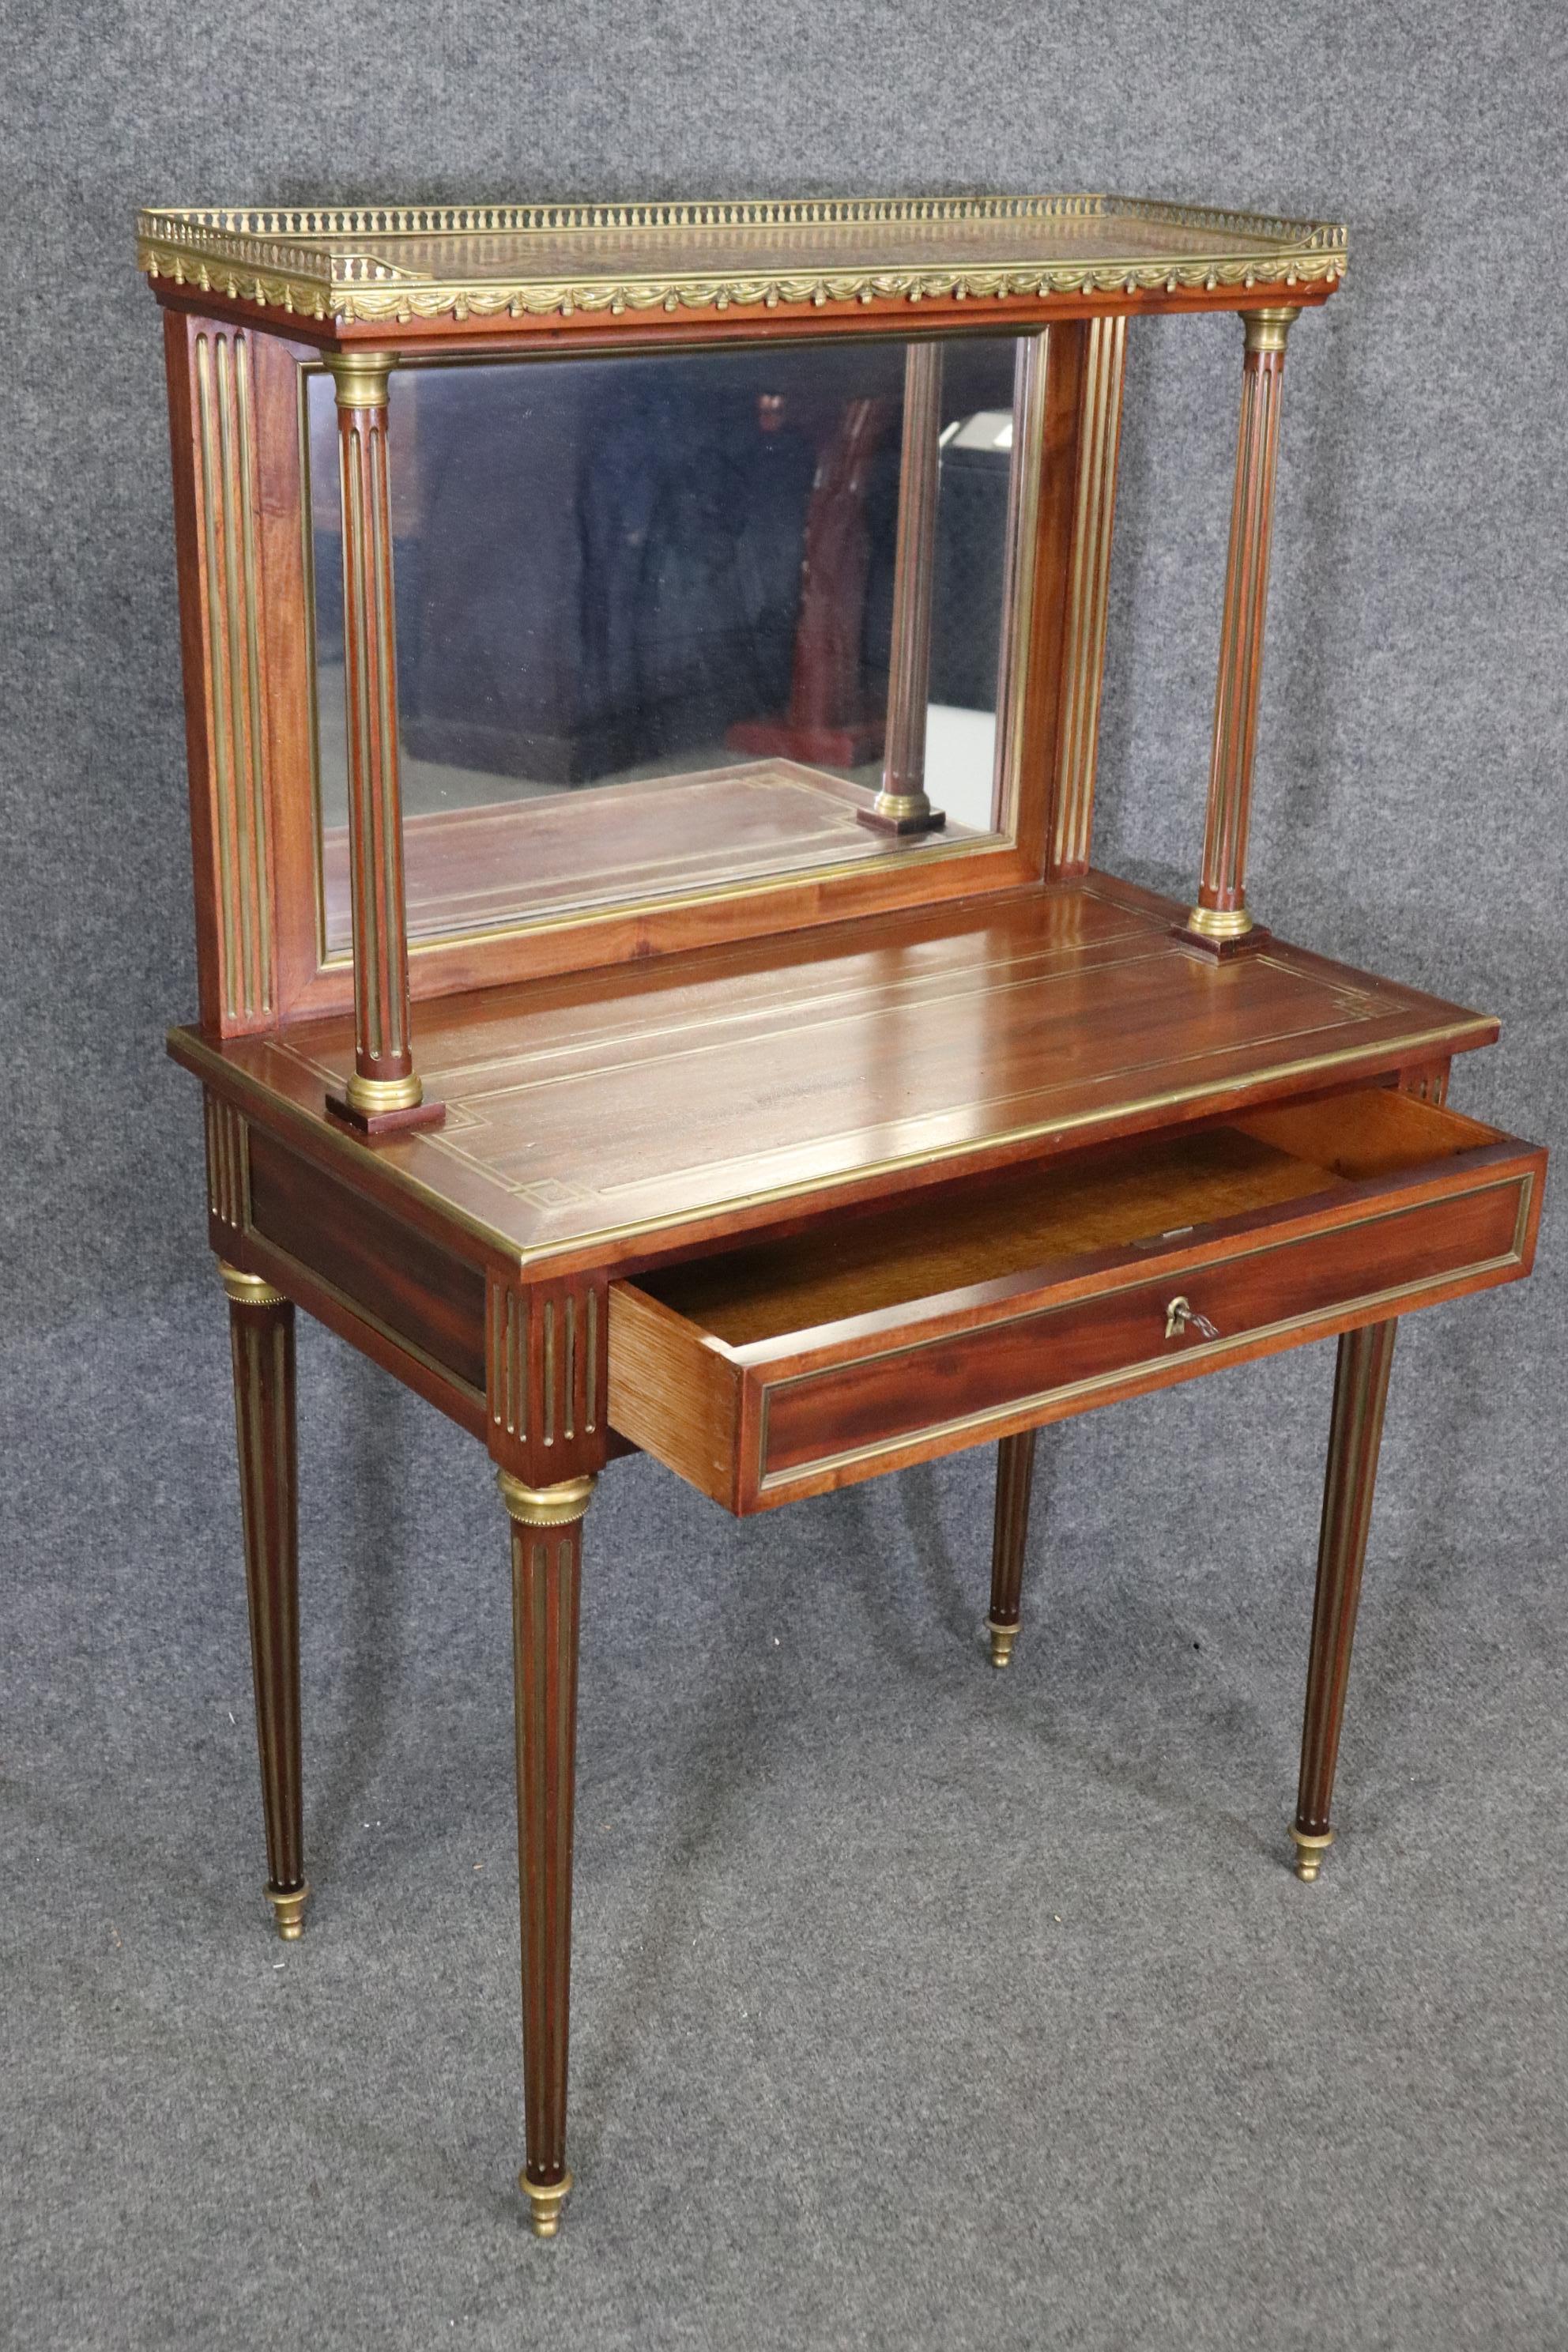 This is a superbly crafted antique French Directoire style brass inlaid and bronze mounted secretaire desk or ladies vanity. The piece is perfect for paying bills or using as a makeup vanity. The desk features a beautiful slab of marble on top and